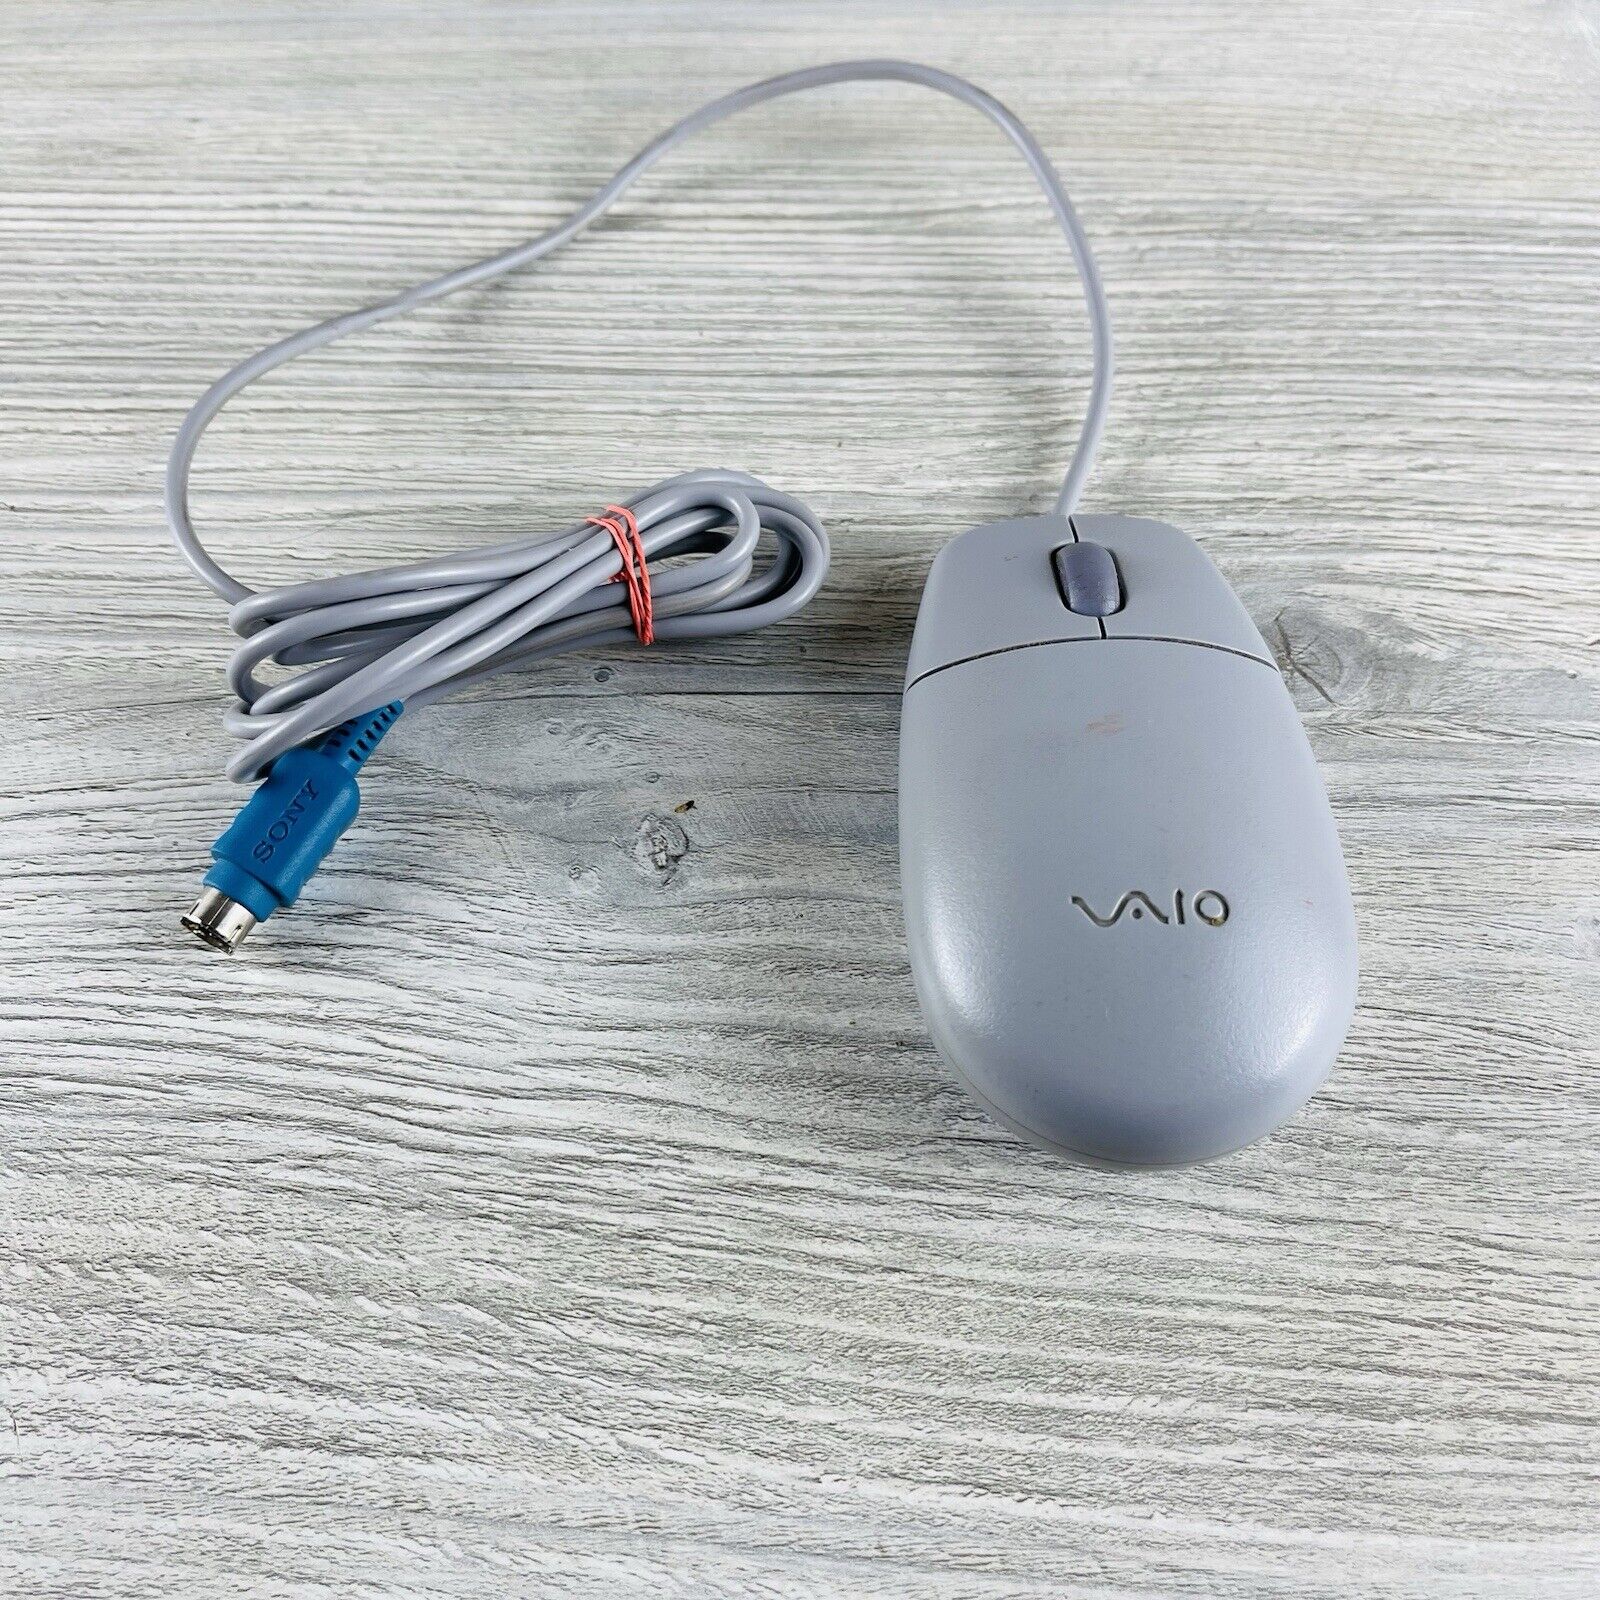 Original SONY Vaio Mouse   2 Port - Wired - Vintage